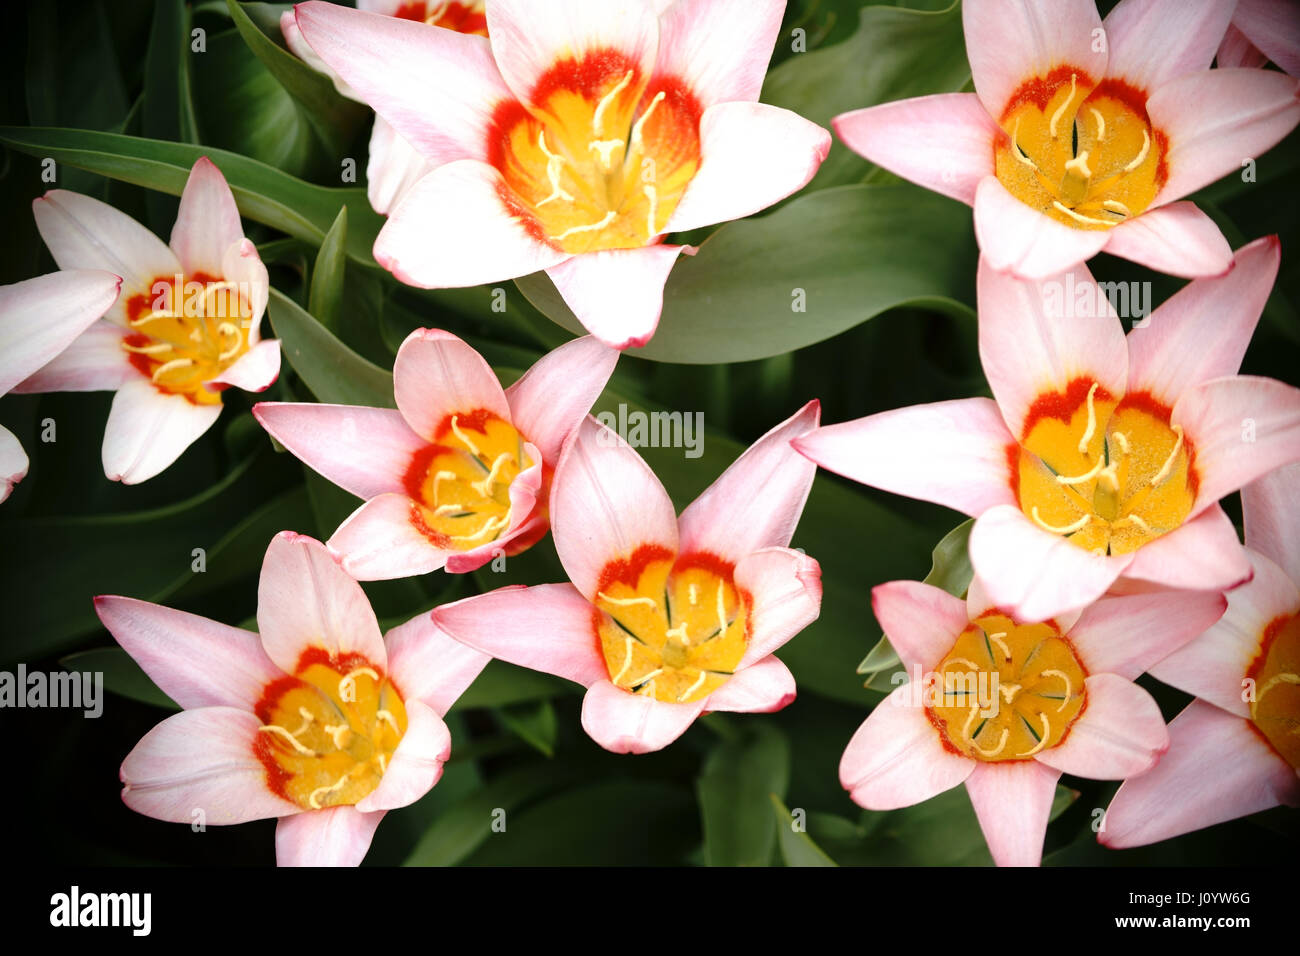 The close-up and top view of the petals of the star-shaped tulip. Stock Photo